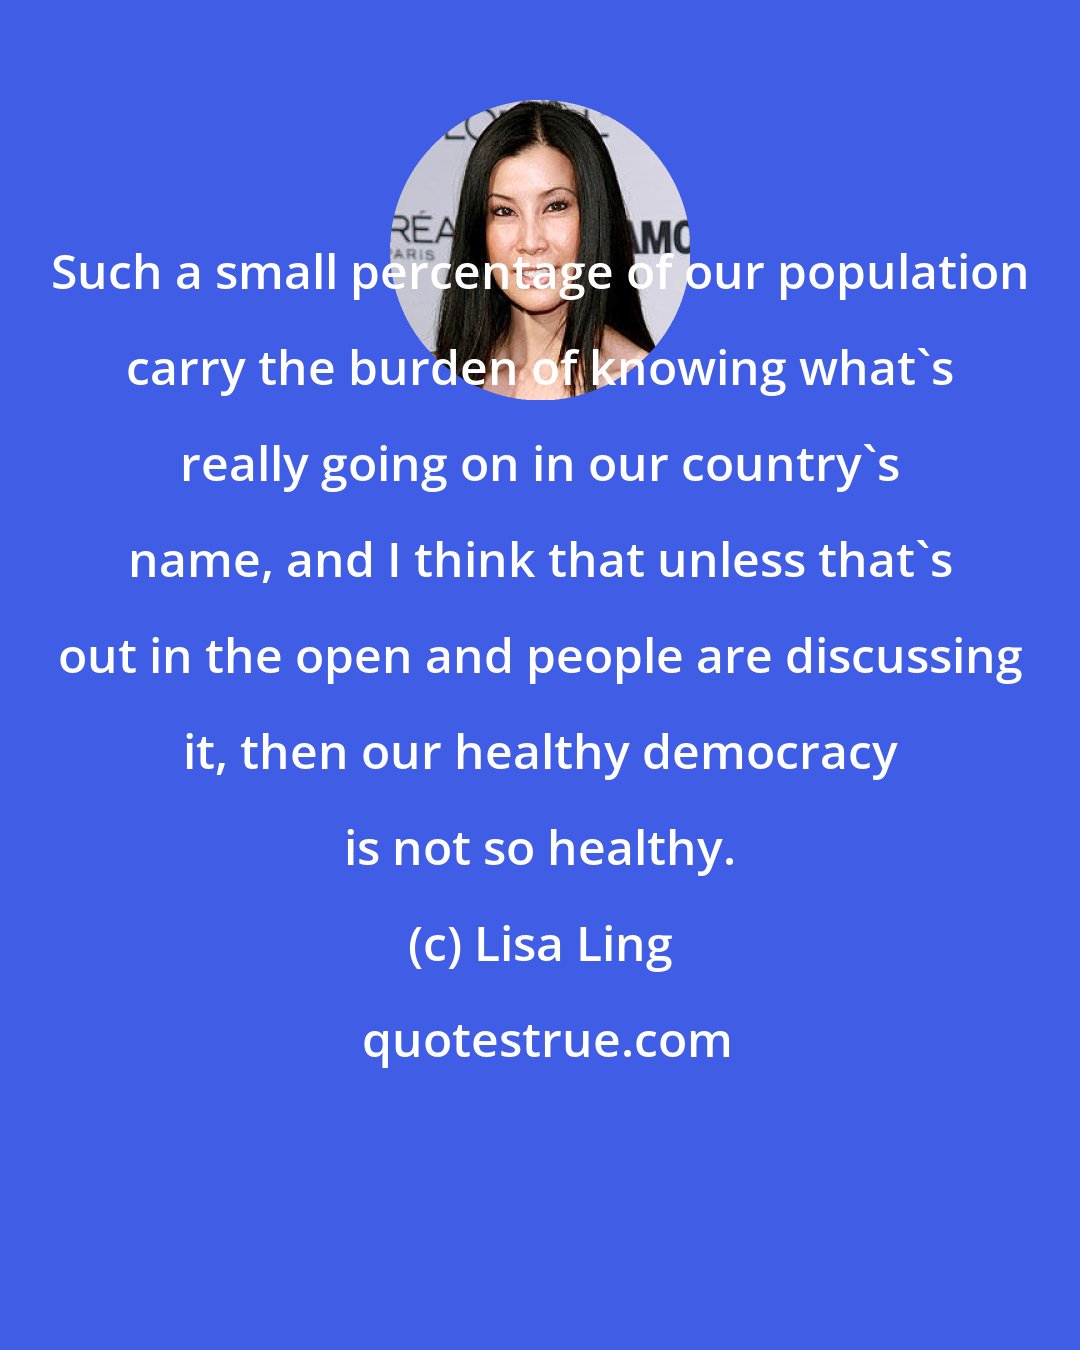 Lisa Ling: Such a small percentage of our population carry the burden of knowing what's really going on in our country's name, and I think that unless that's out in the open and people are discussing it, then our healthy democracy is not so healthy.